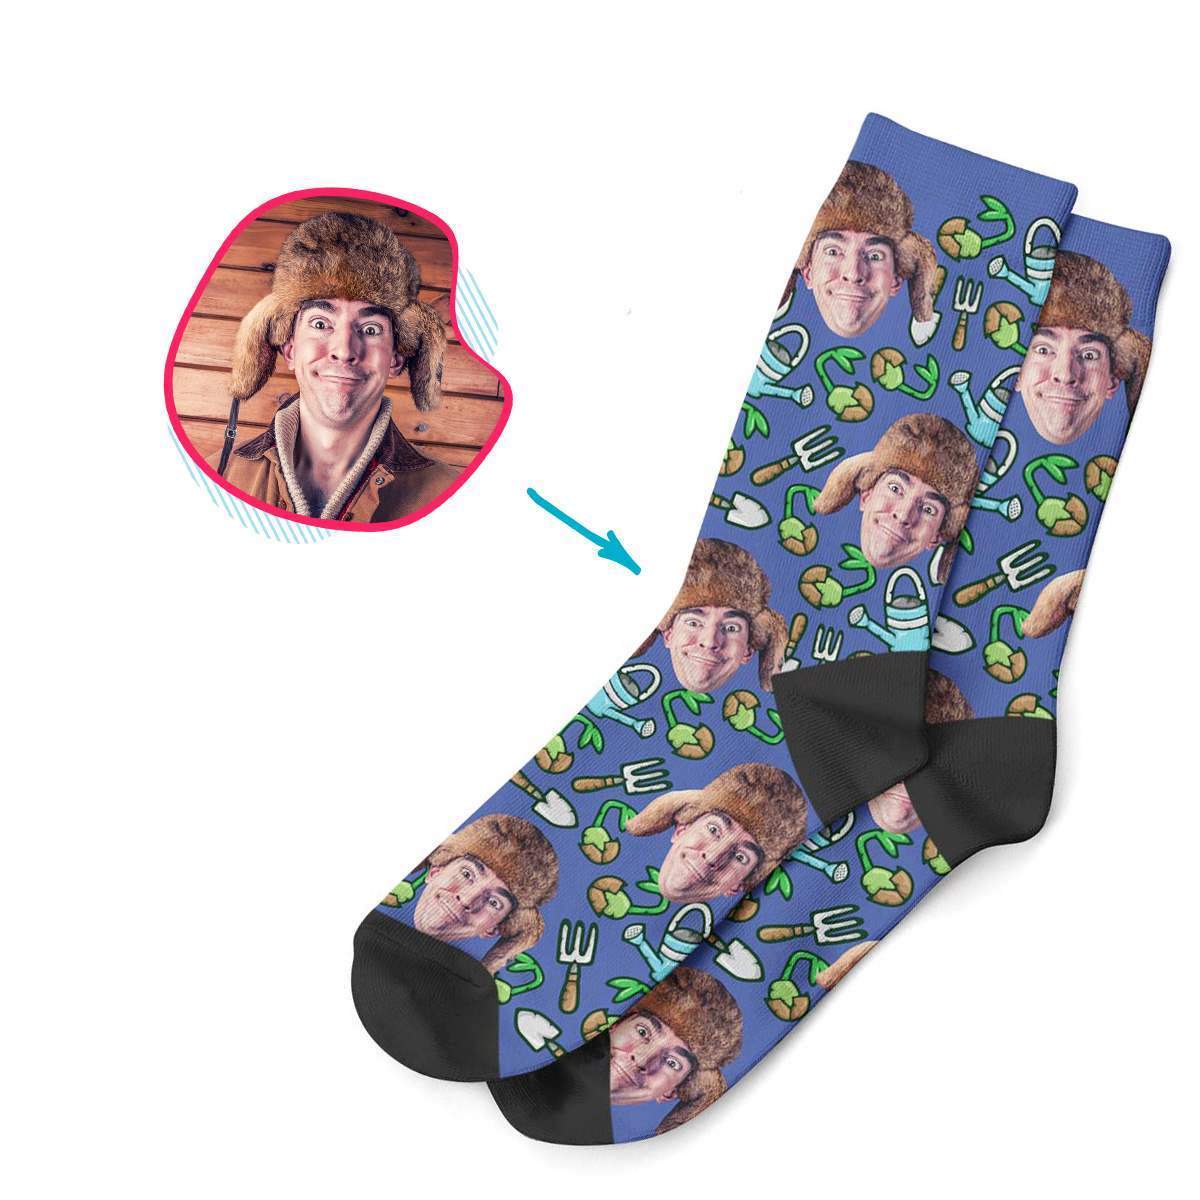 darkblue Gardening socks personalized with photo of face printed on them